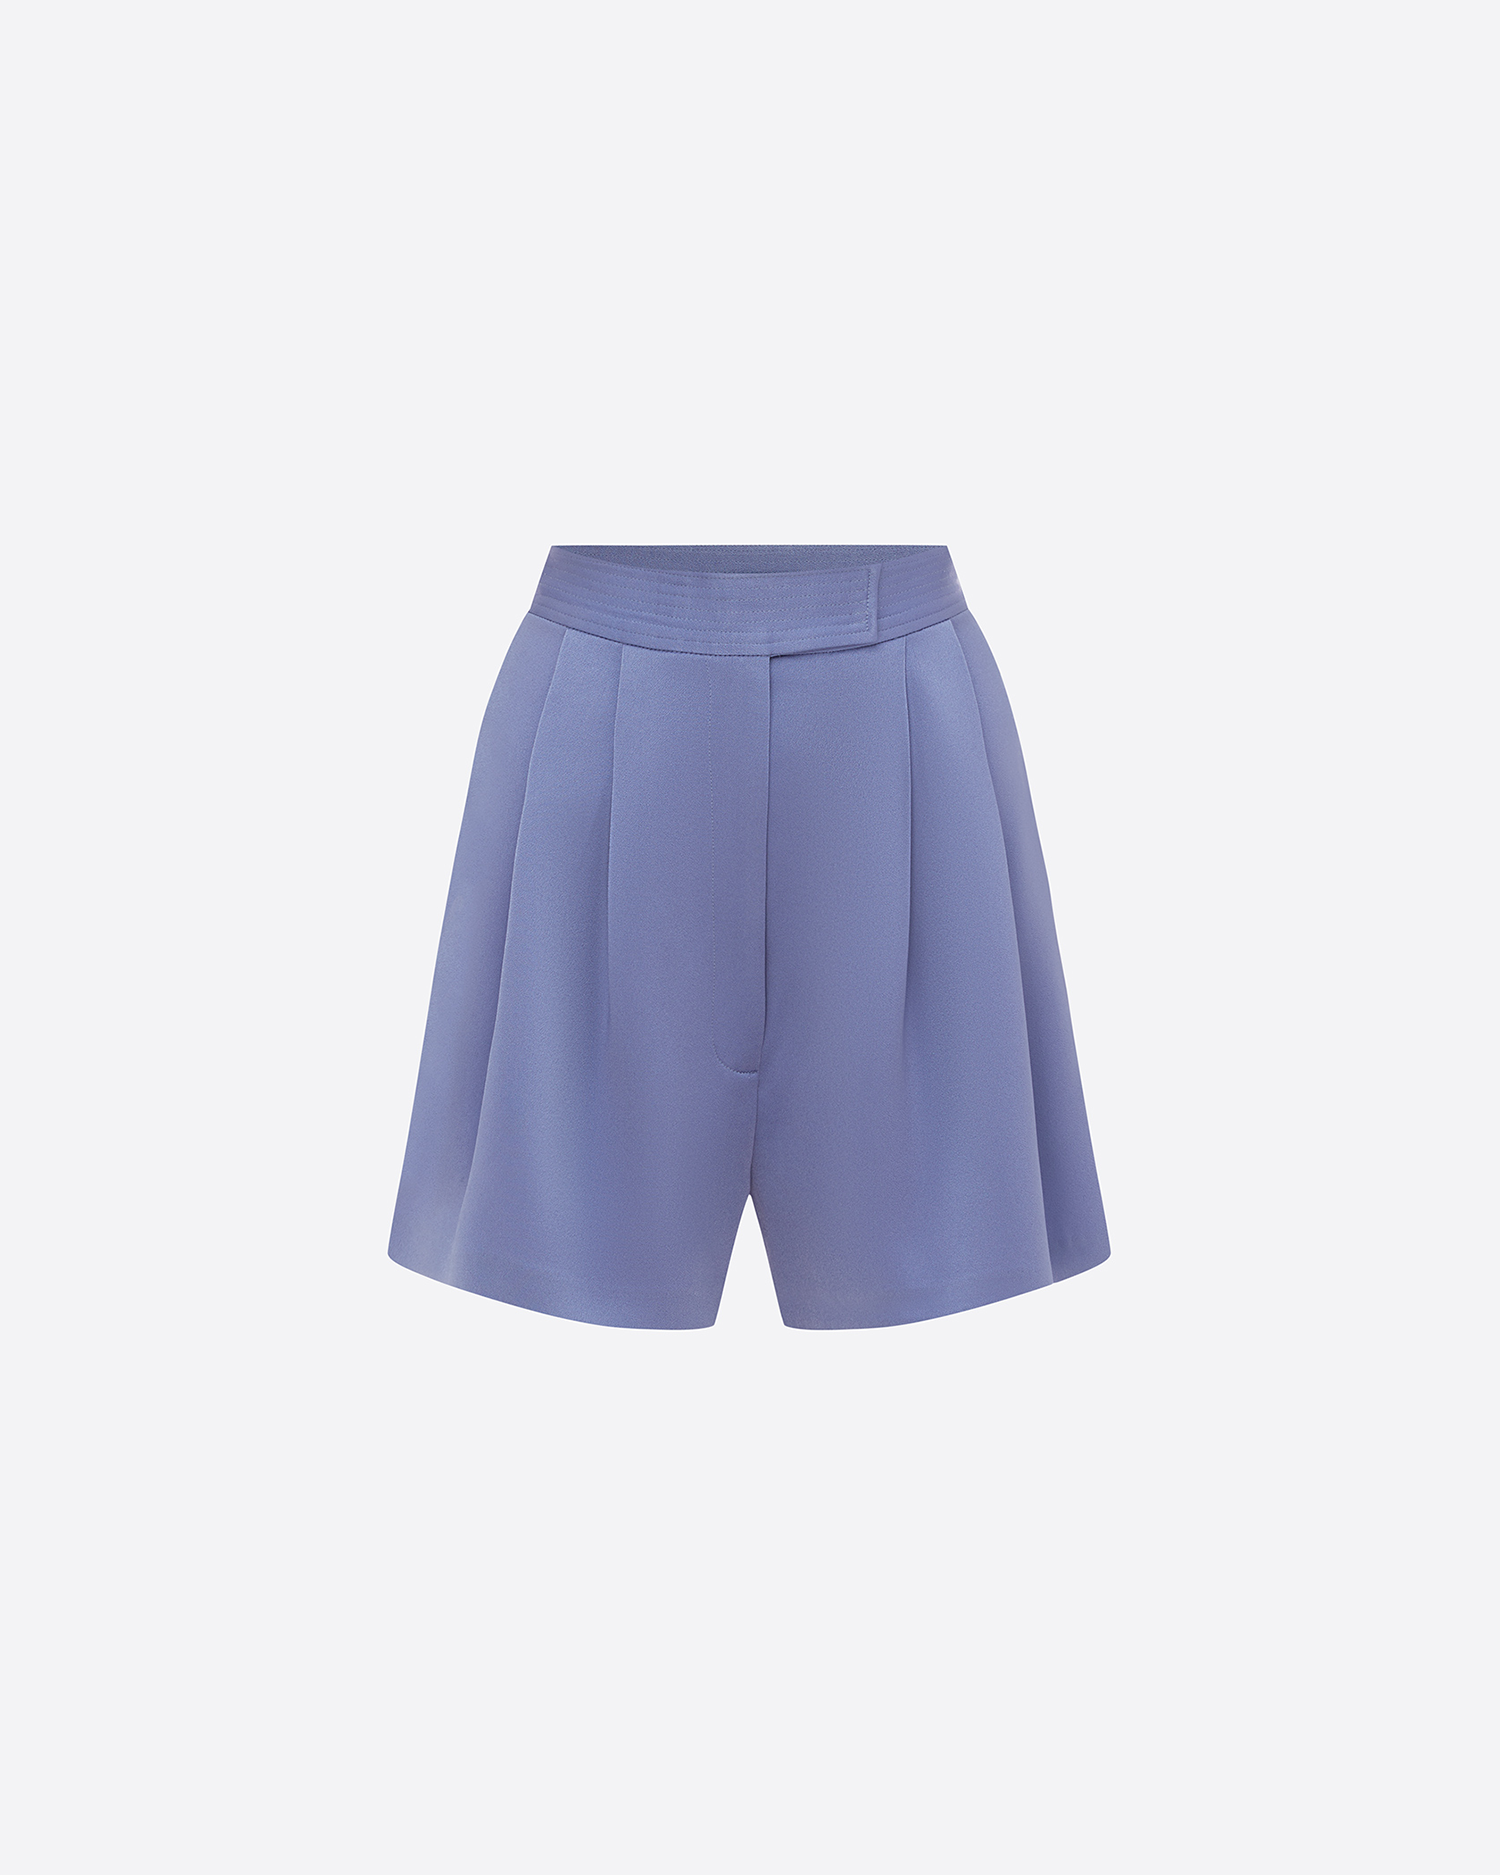 Pleated Short in Satin Crepe